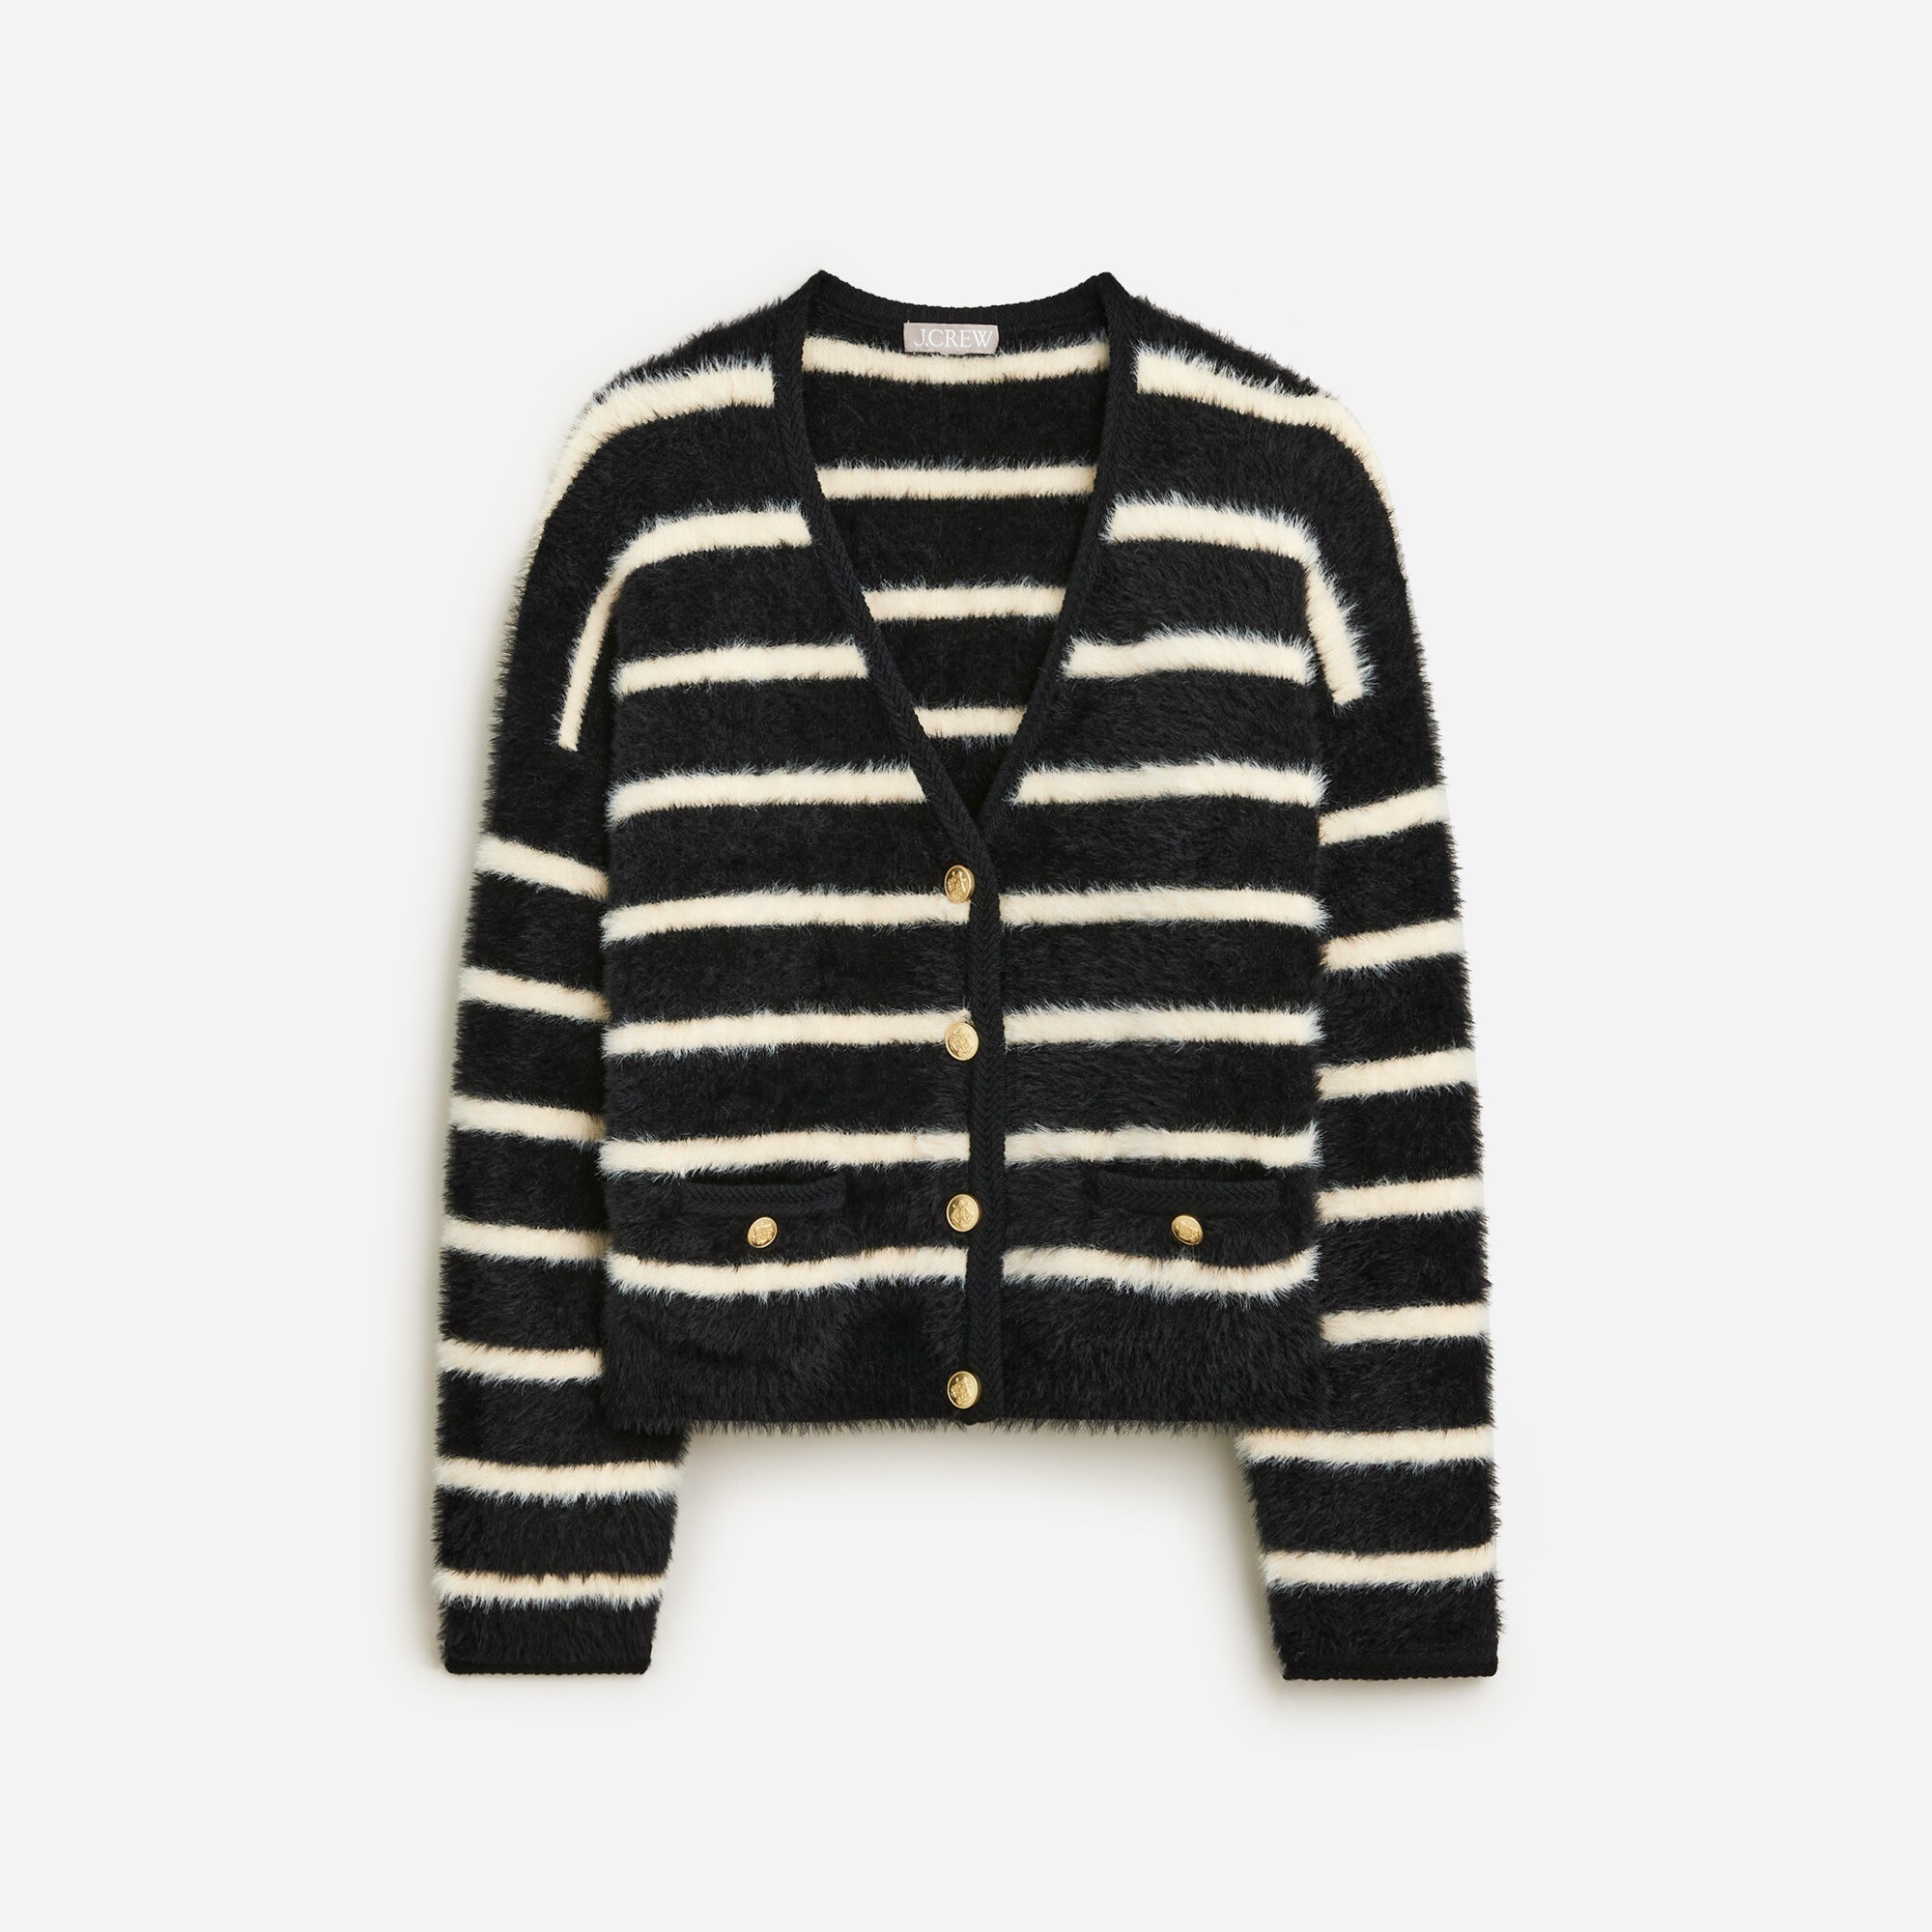 womens Sweater lady jacket in striped brushed yarn